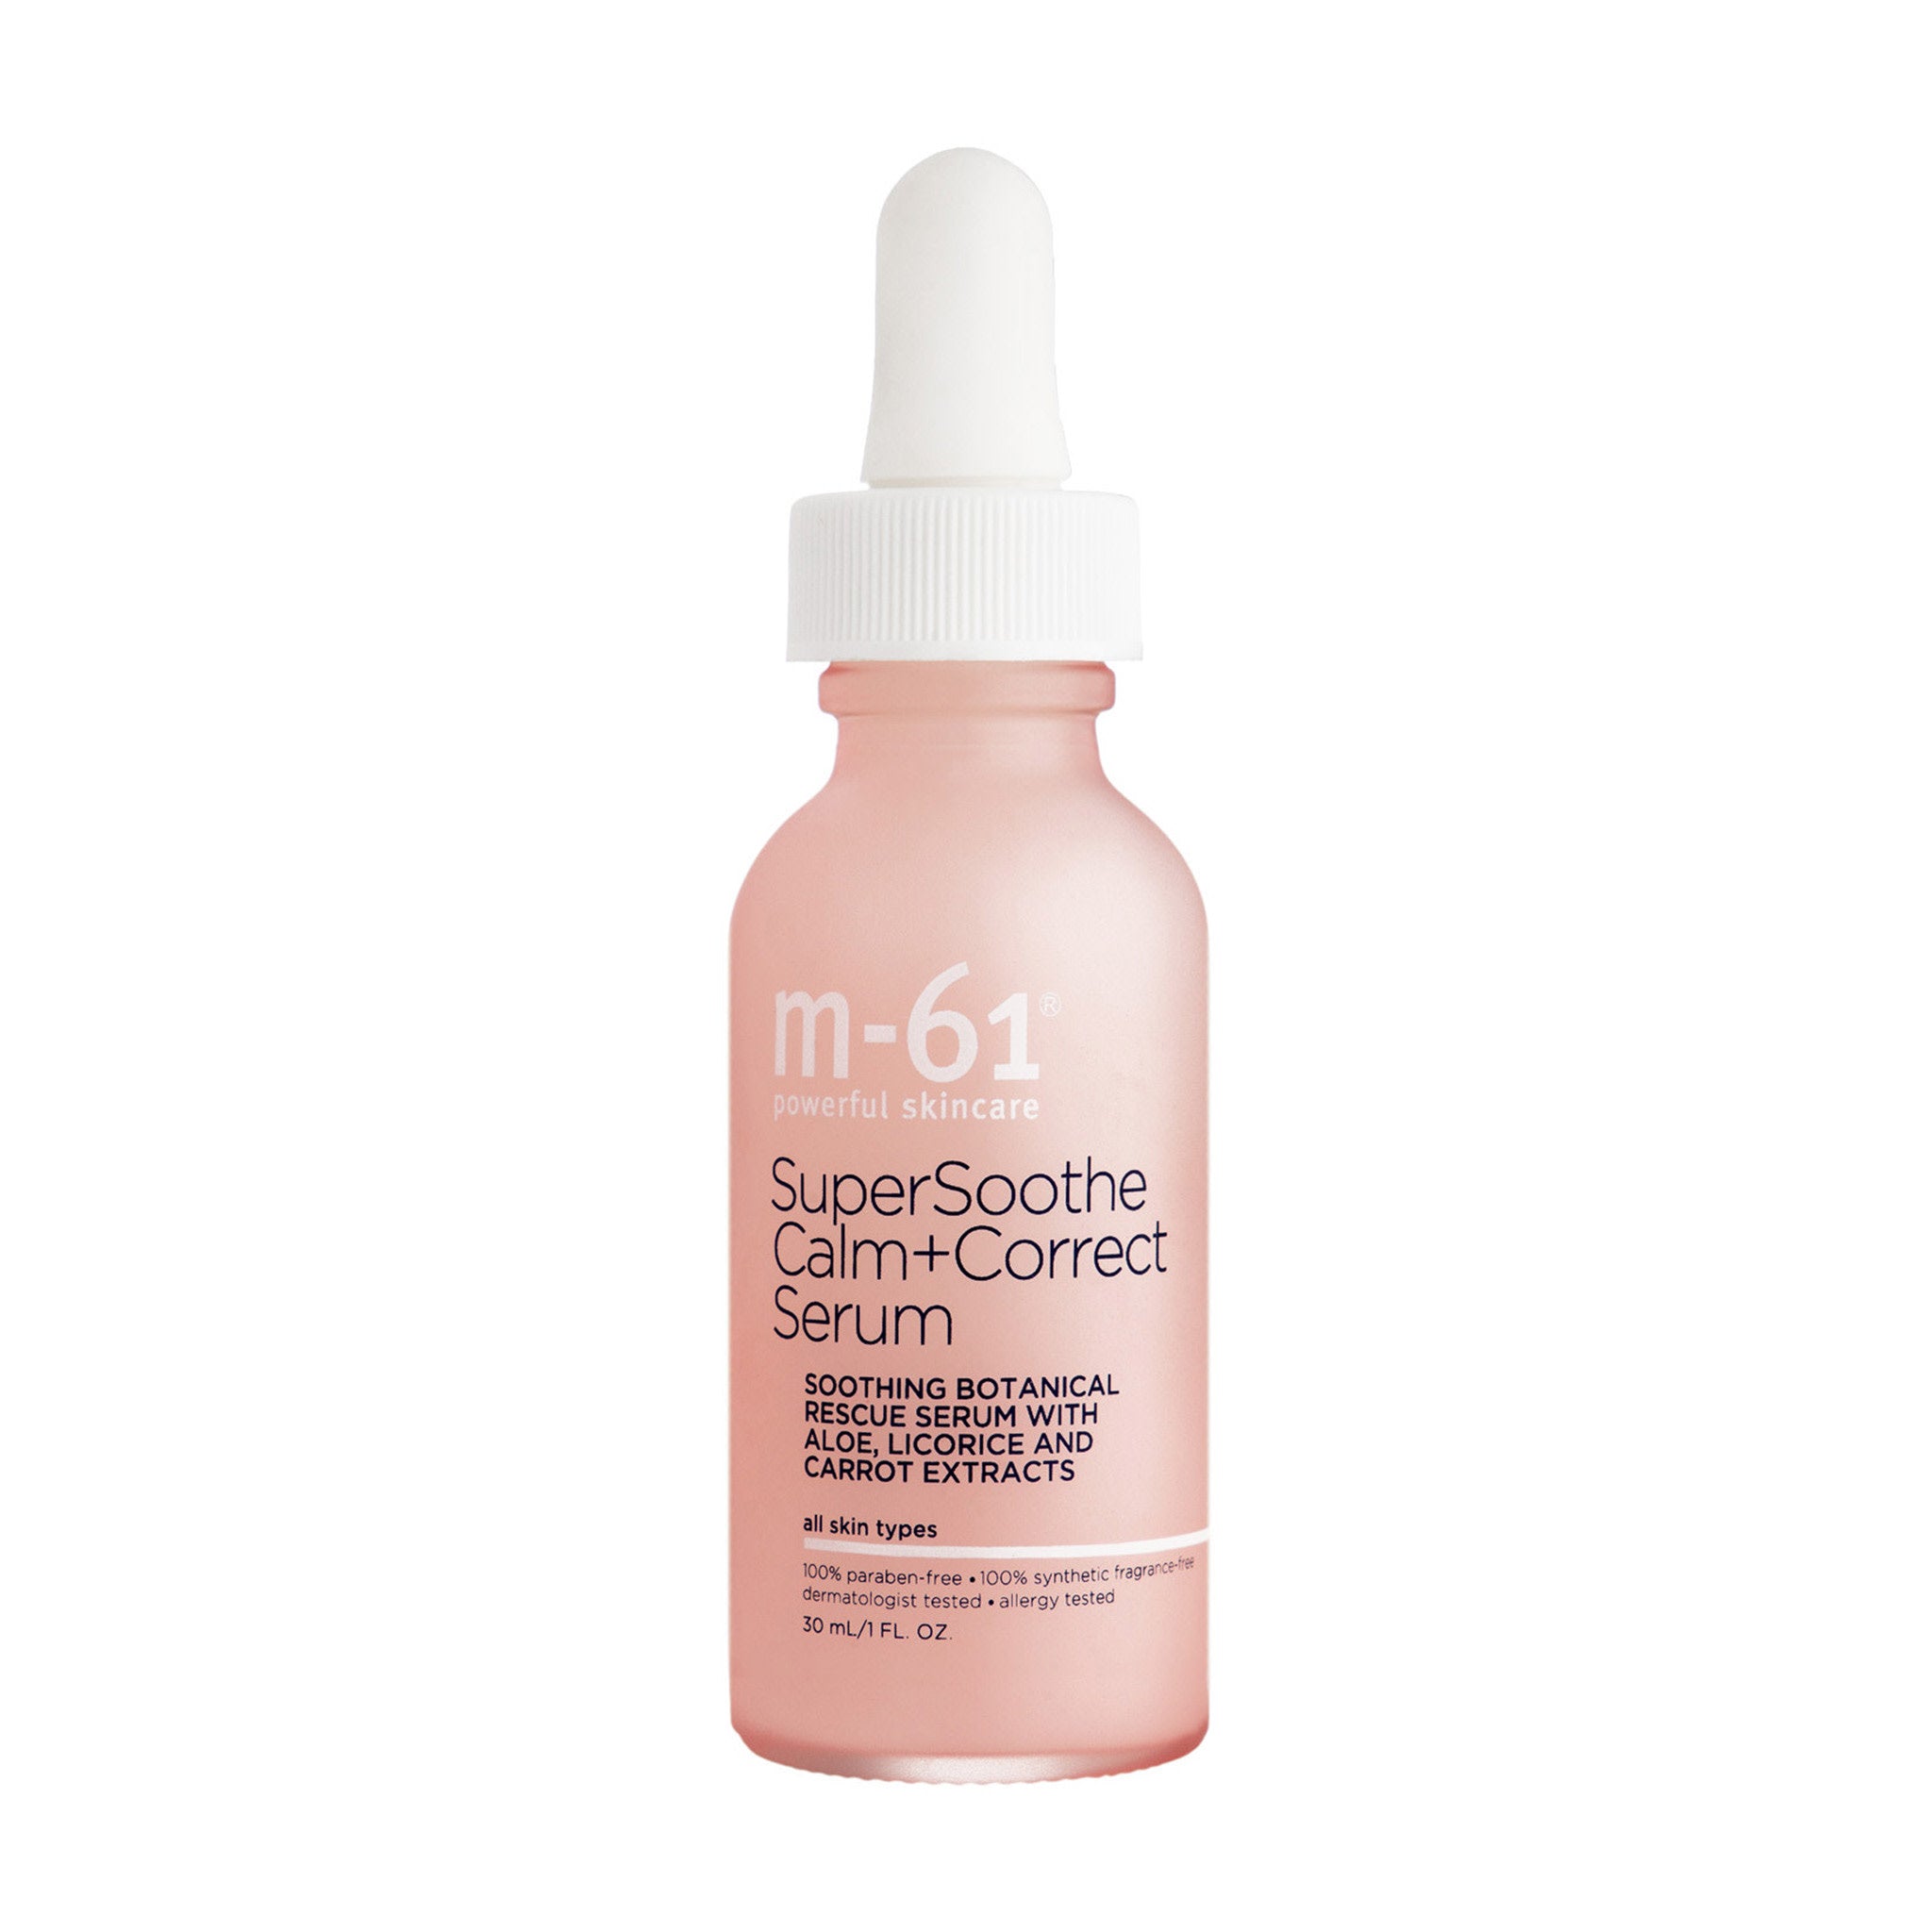 M-61 SuperSoothe Calm+Correct Serum main image.